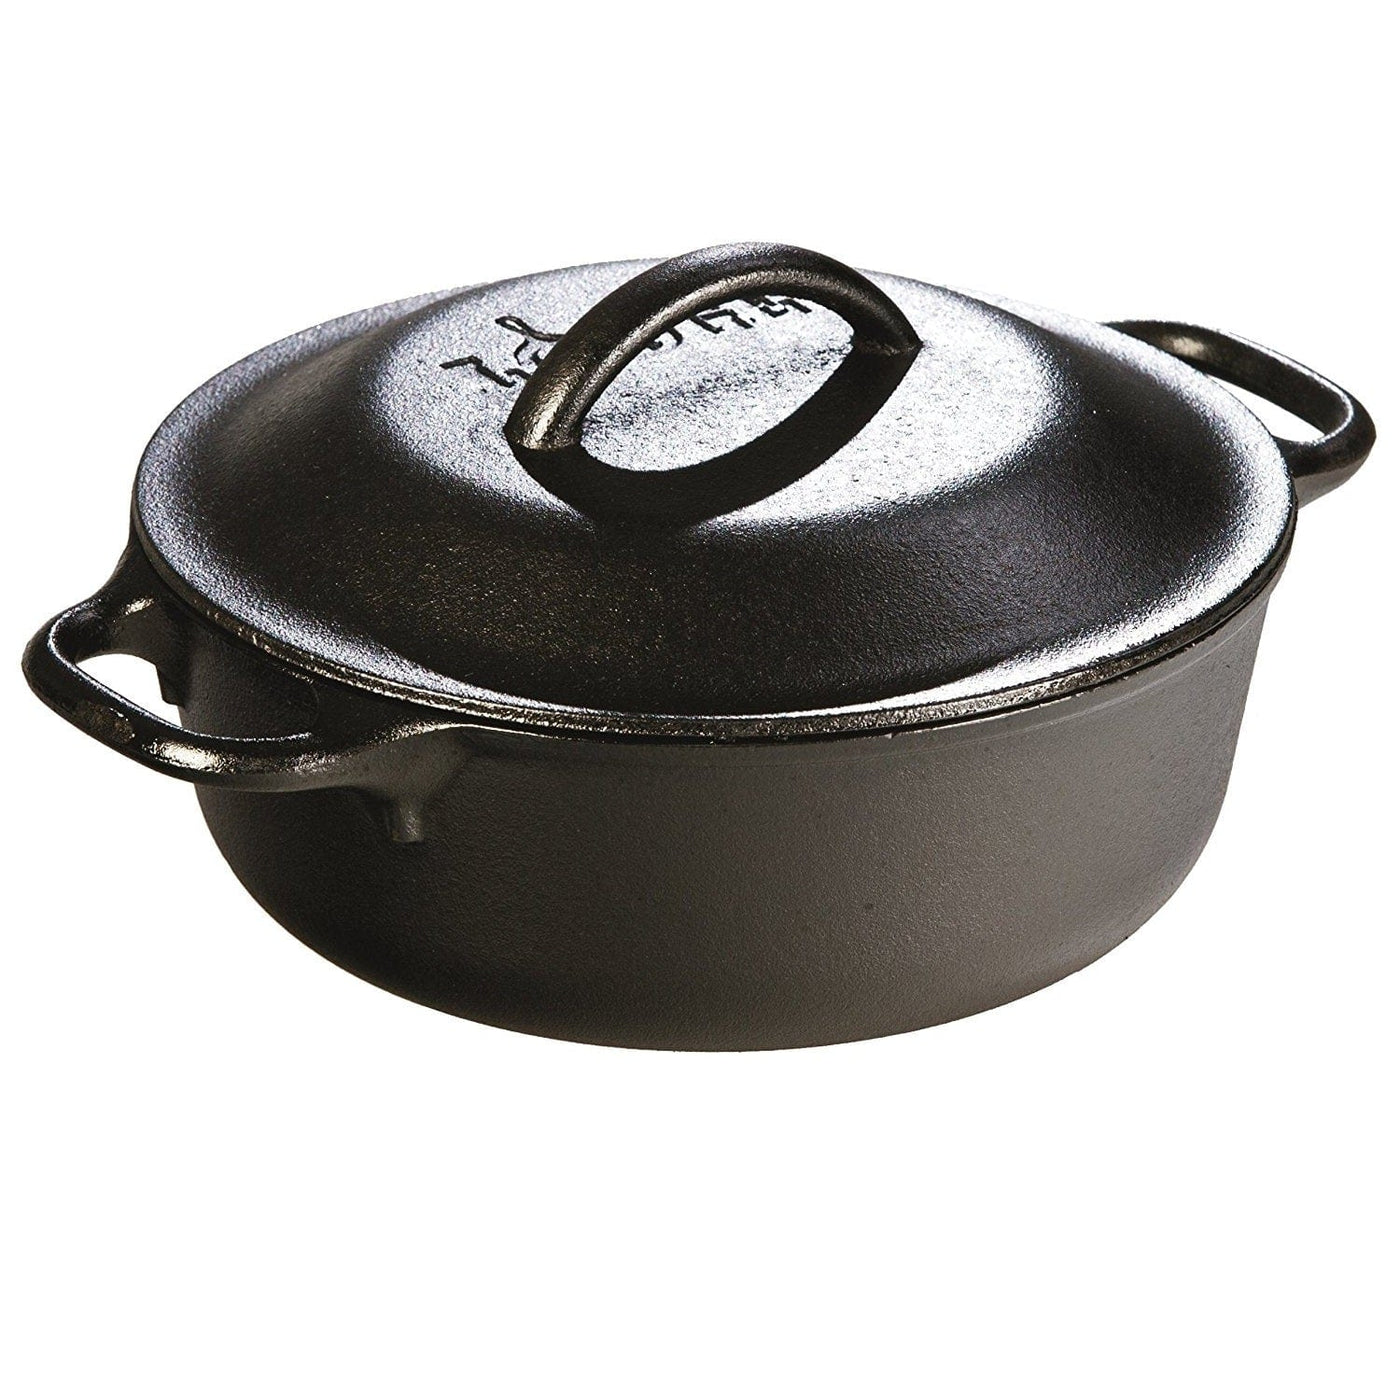 Lodge Cast Iron Lodge 8in Cast Iron Serving Pot Pre-Seasoned 2-Quart Camping And Outdoor